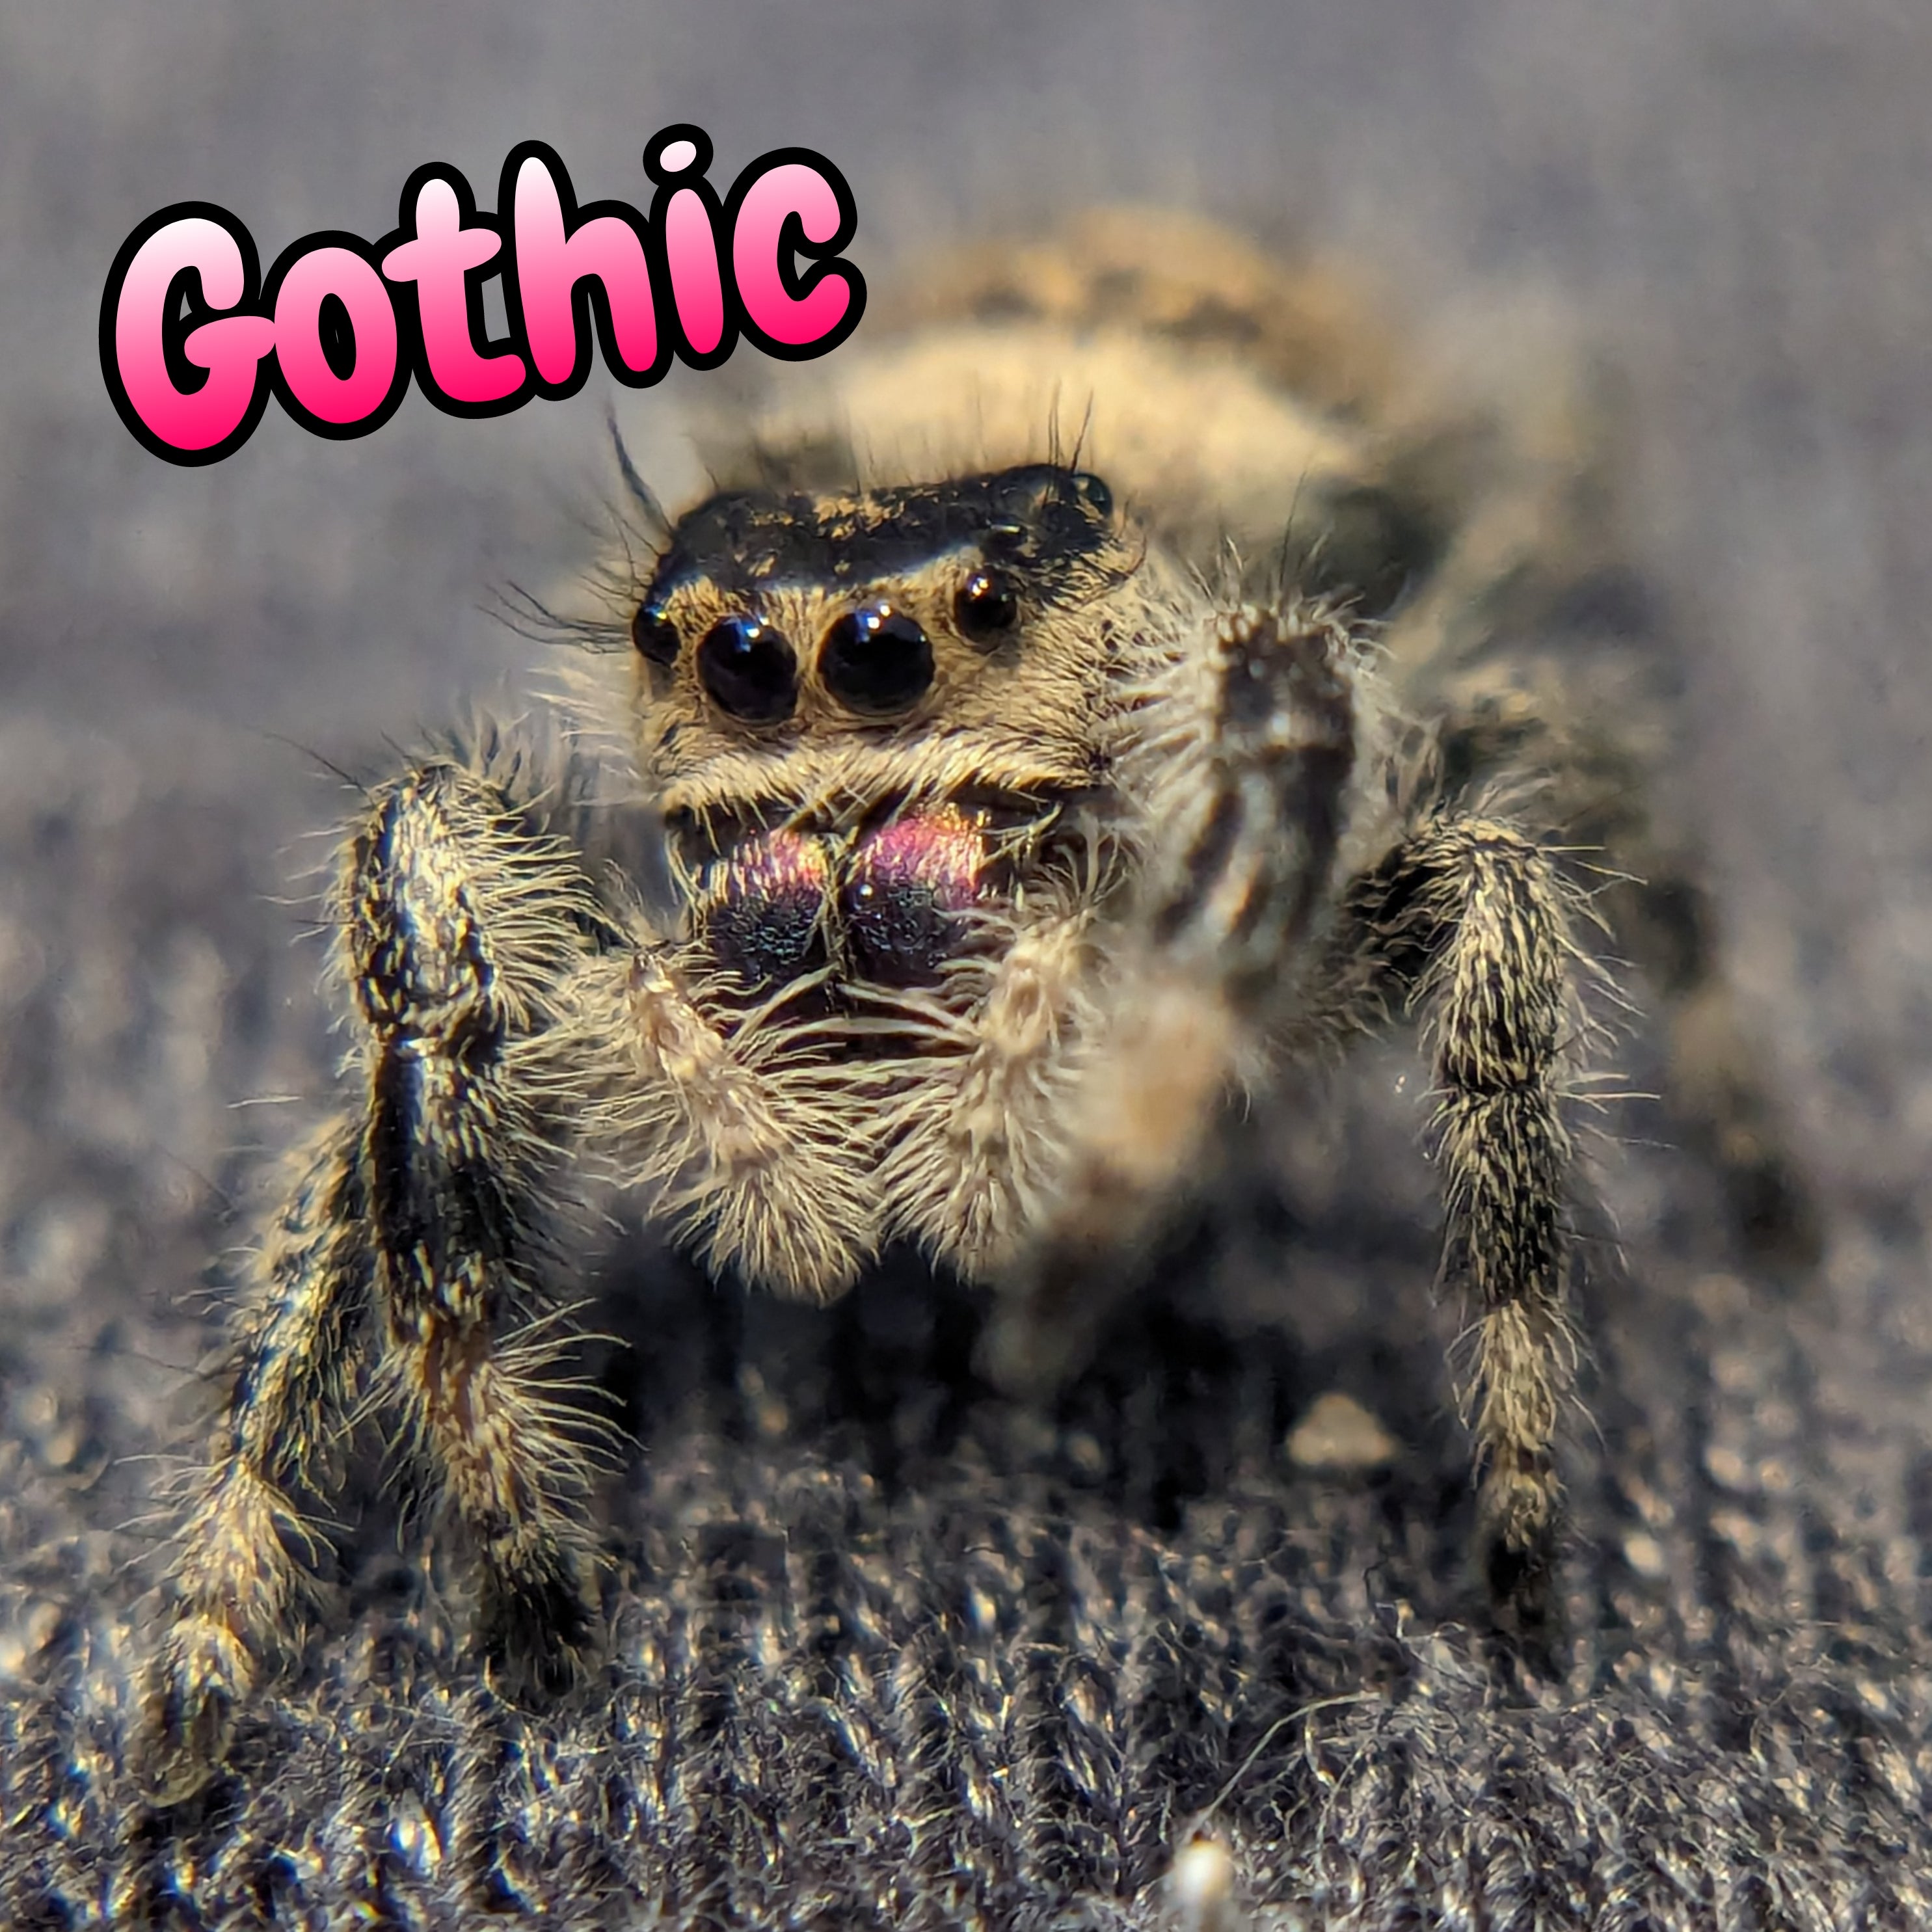 Regal Jumping Spider "Gothic"